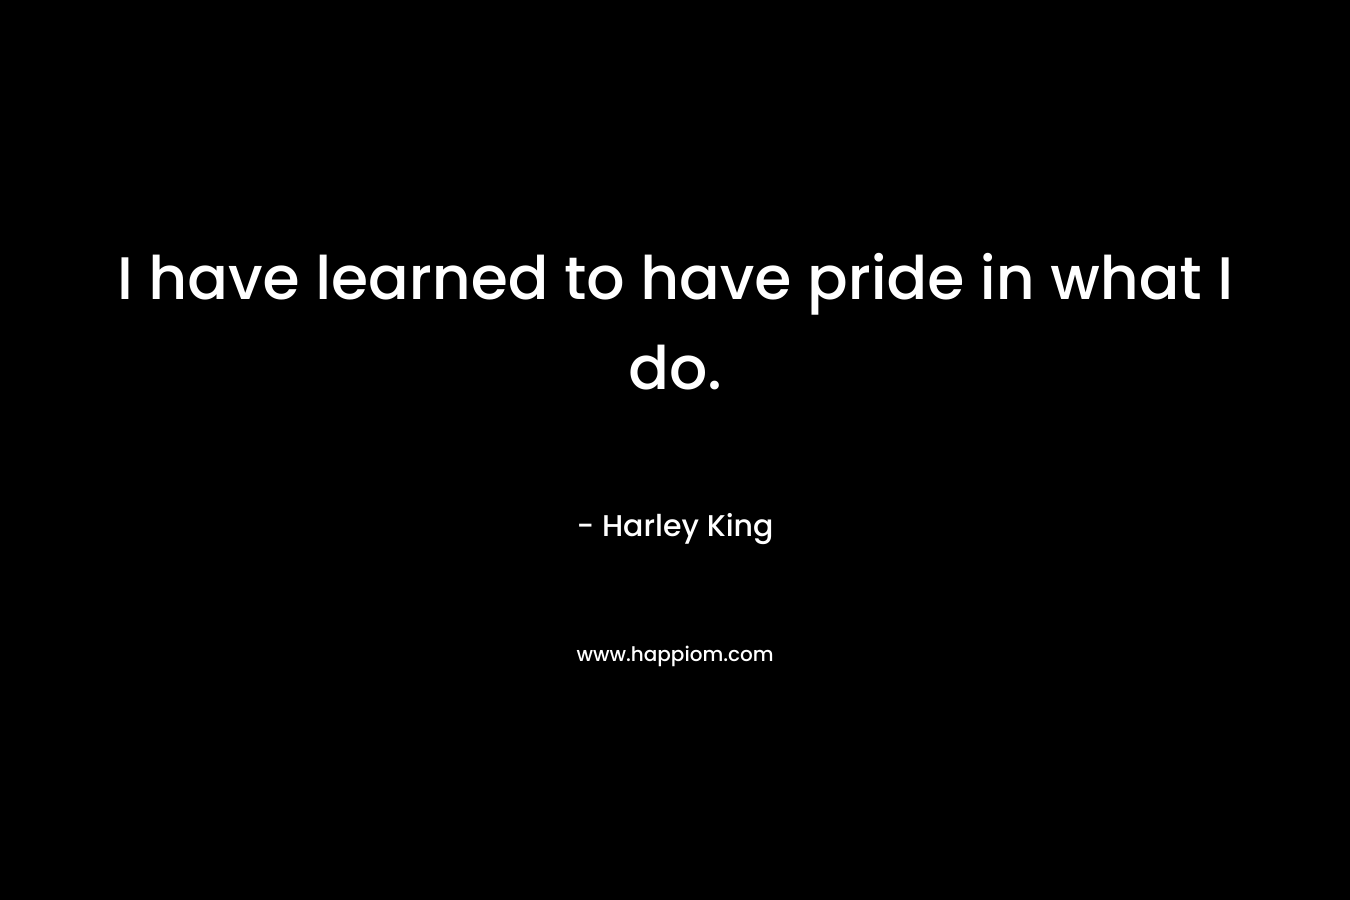 I have learned to have pride in what I do. – Harley King